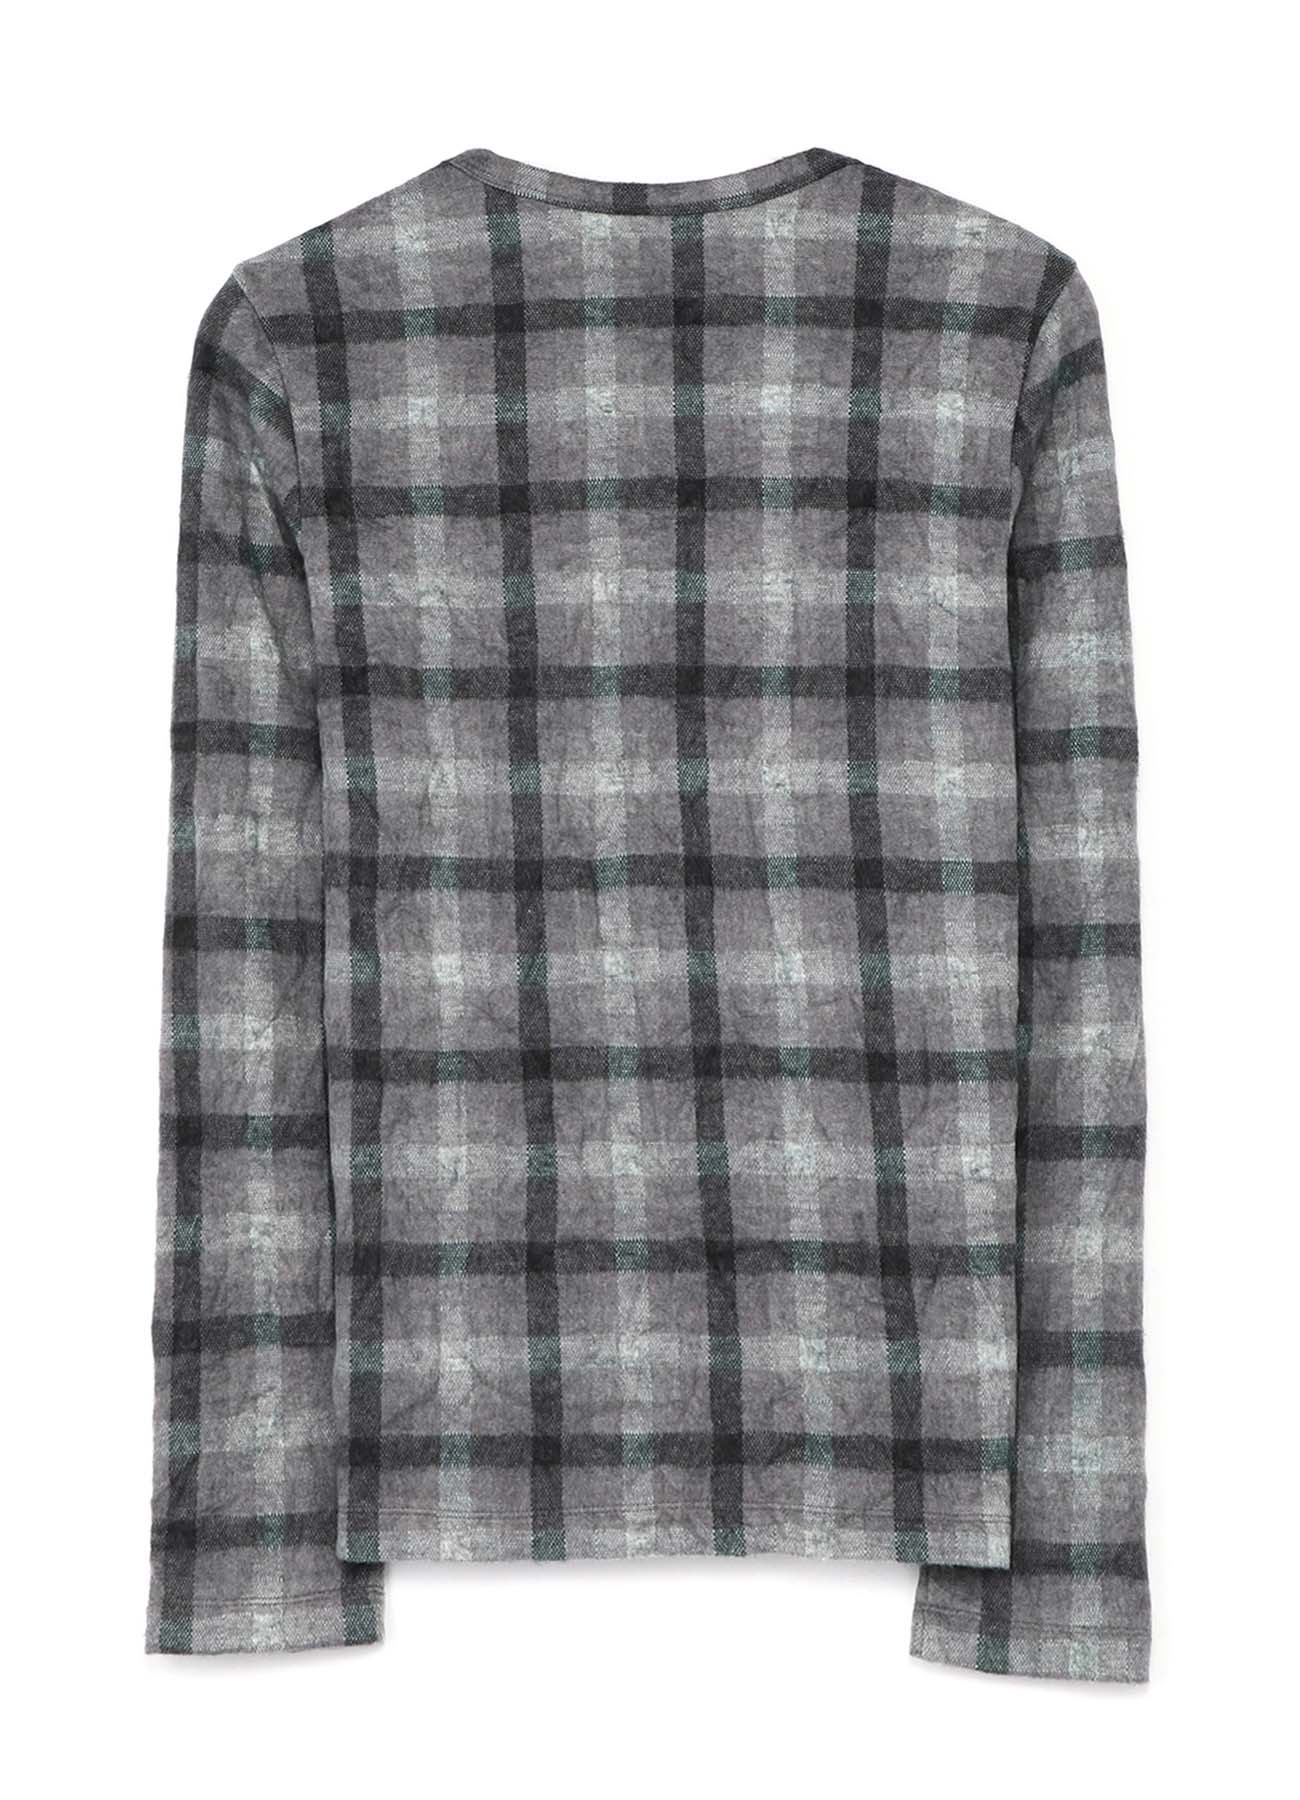 SHAGGY CHECK JQ WRINKLE ROUND NECK LONG SLEEVE T